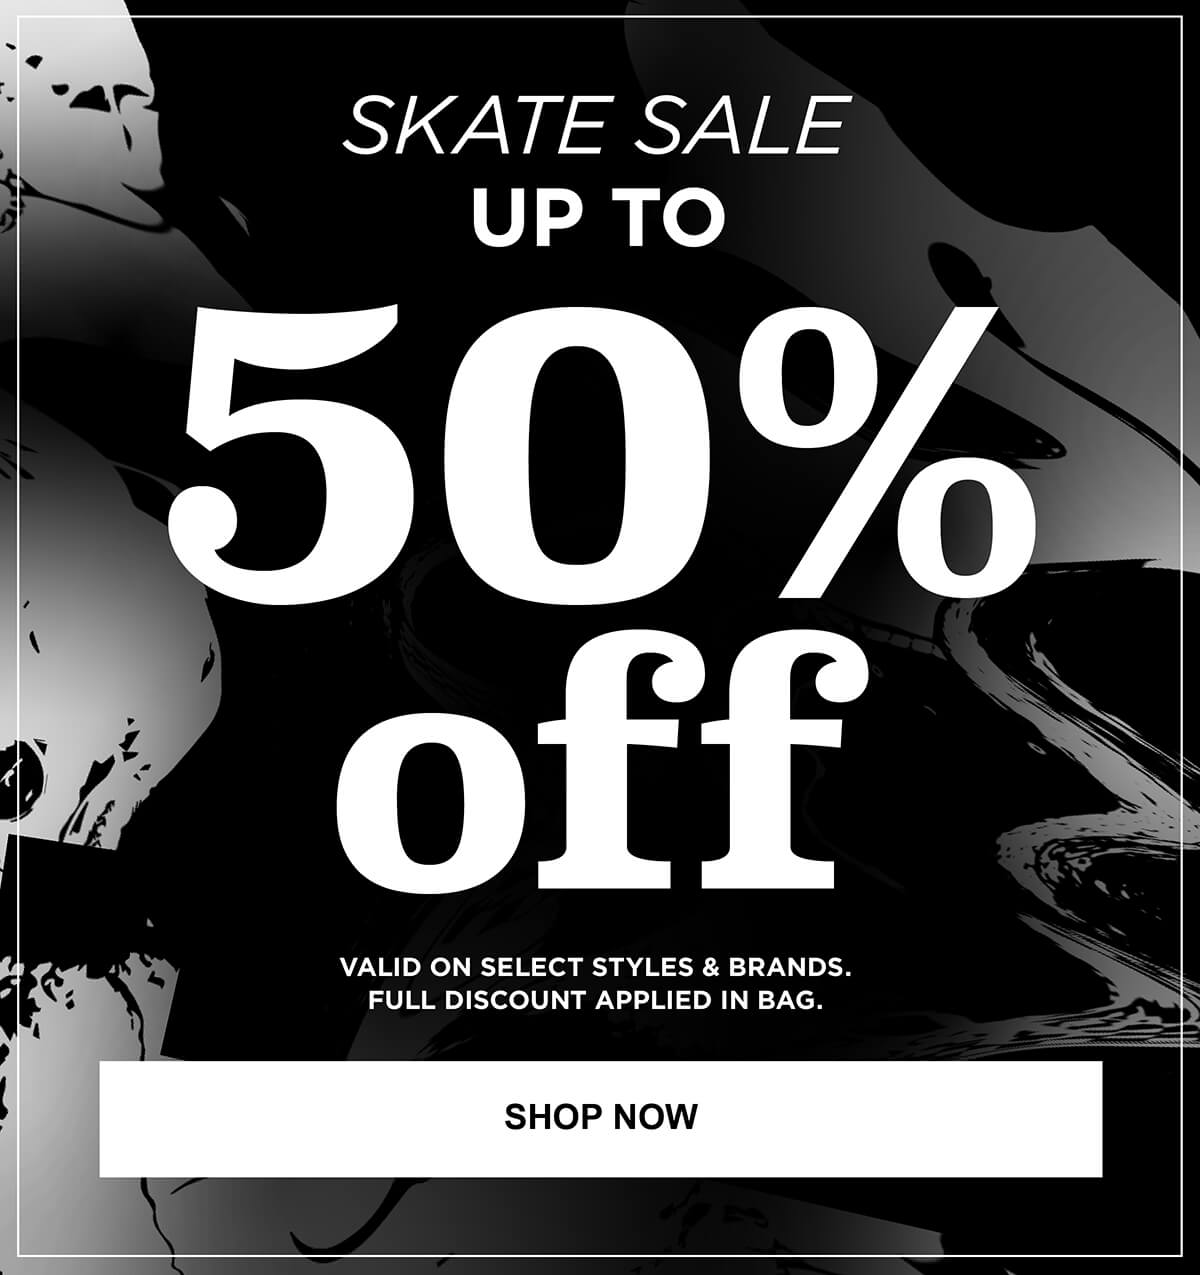 SKATE SALE - UP TO 50% OFF GEAR AND BOARDS